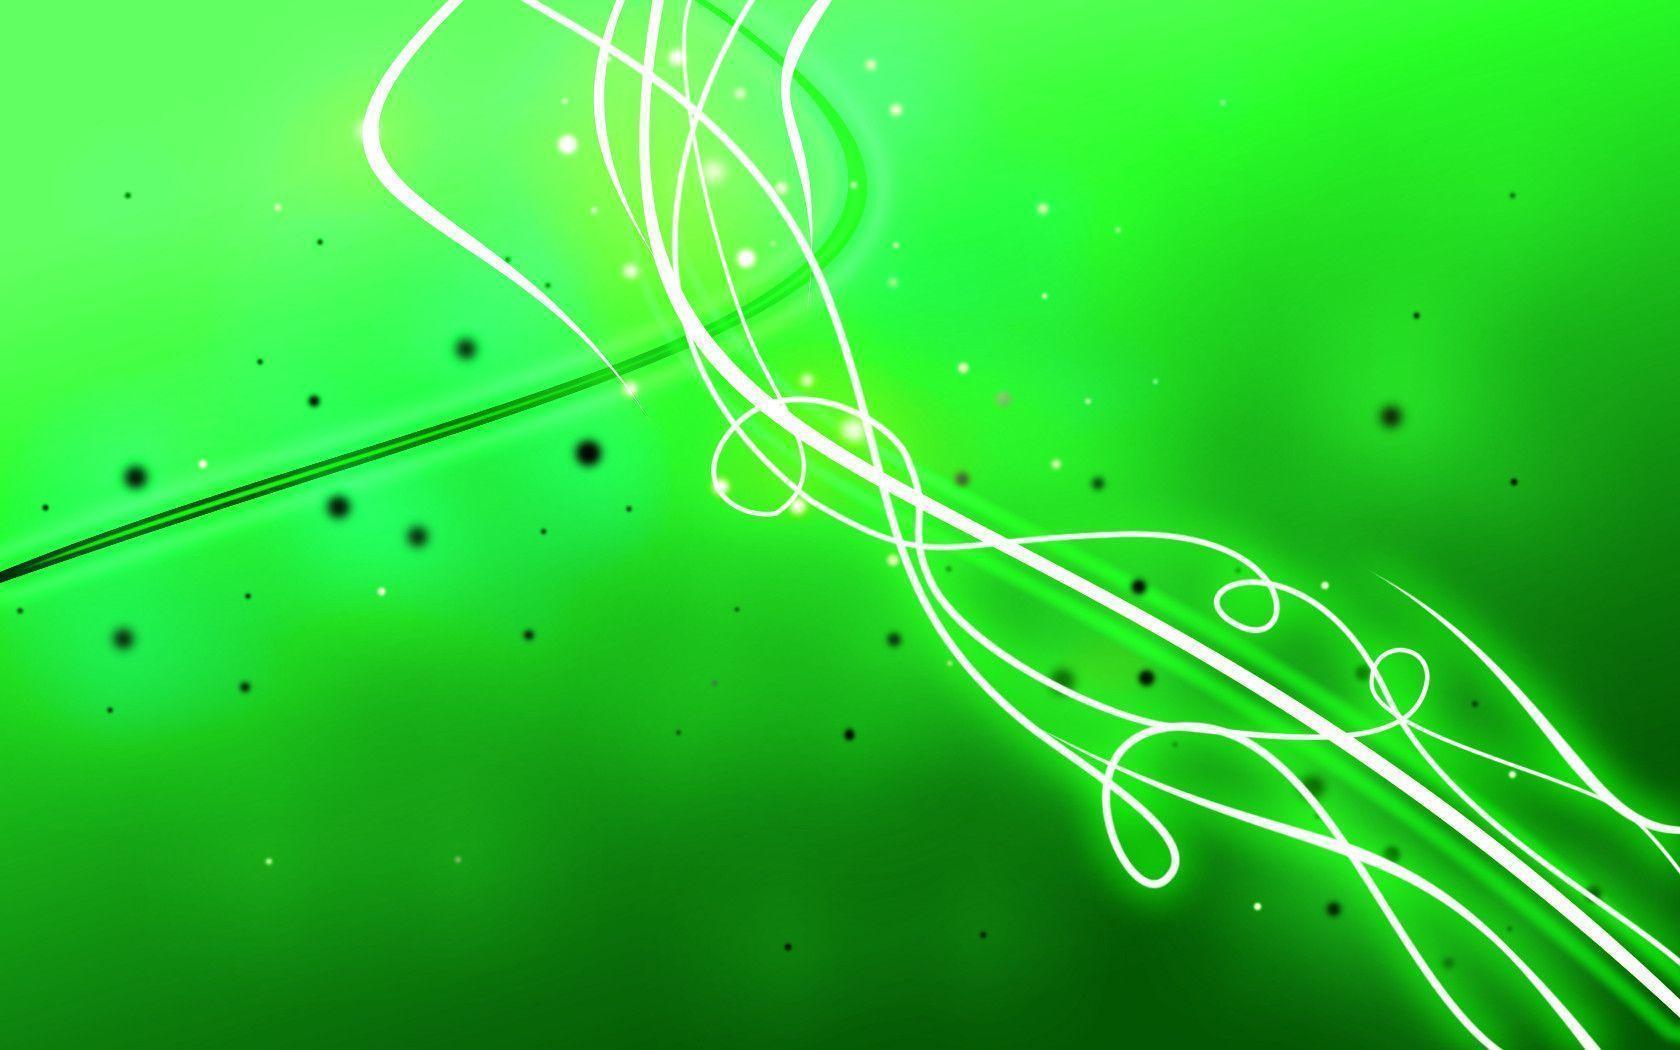 Wallpaper For > Lime Green Background Image